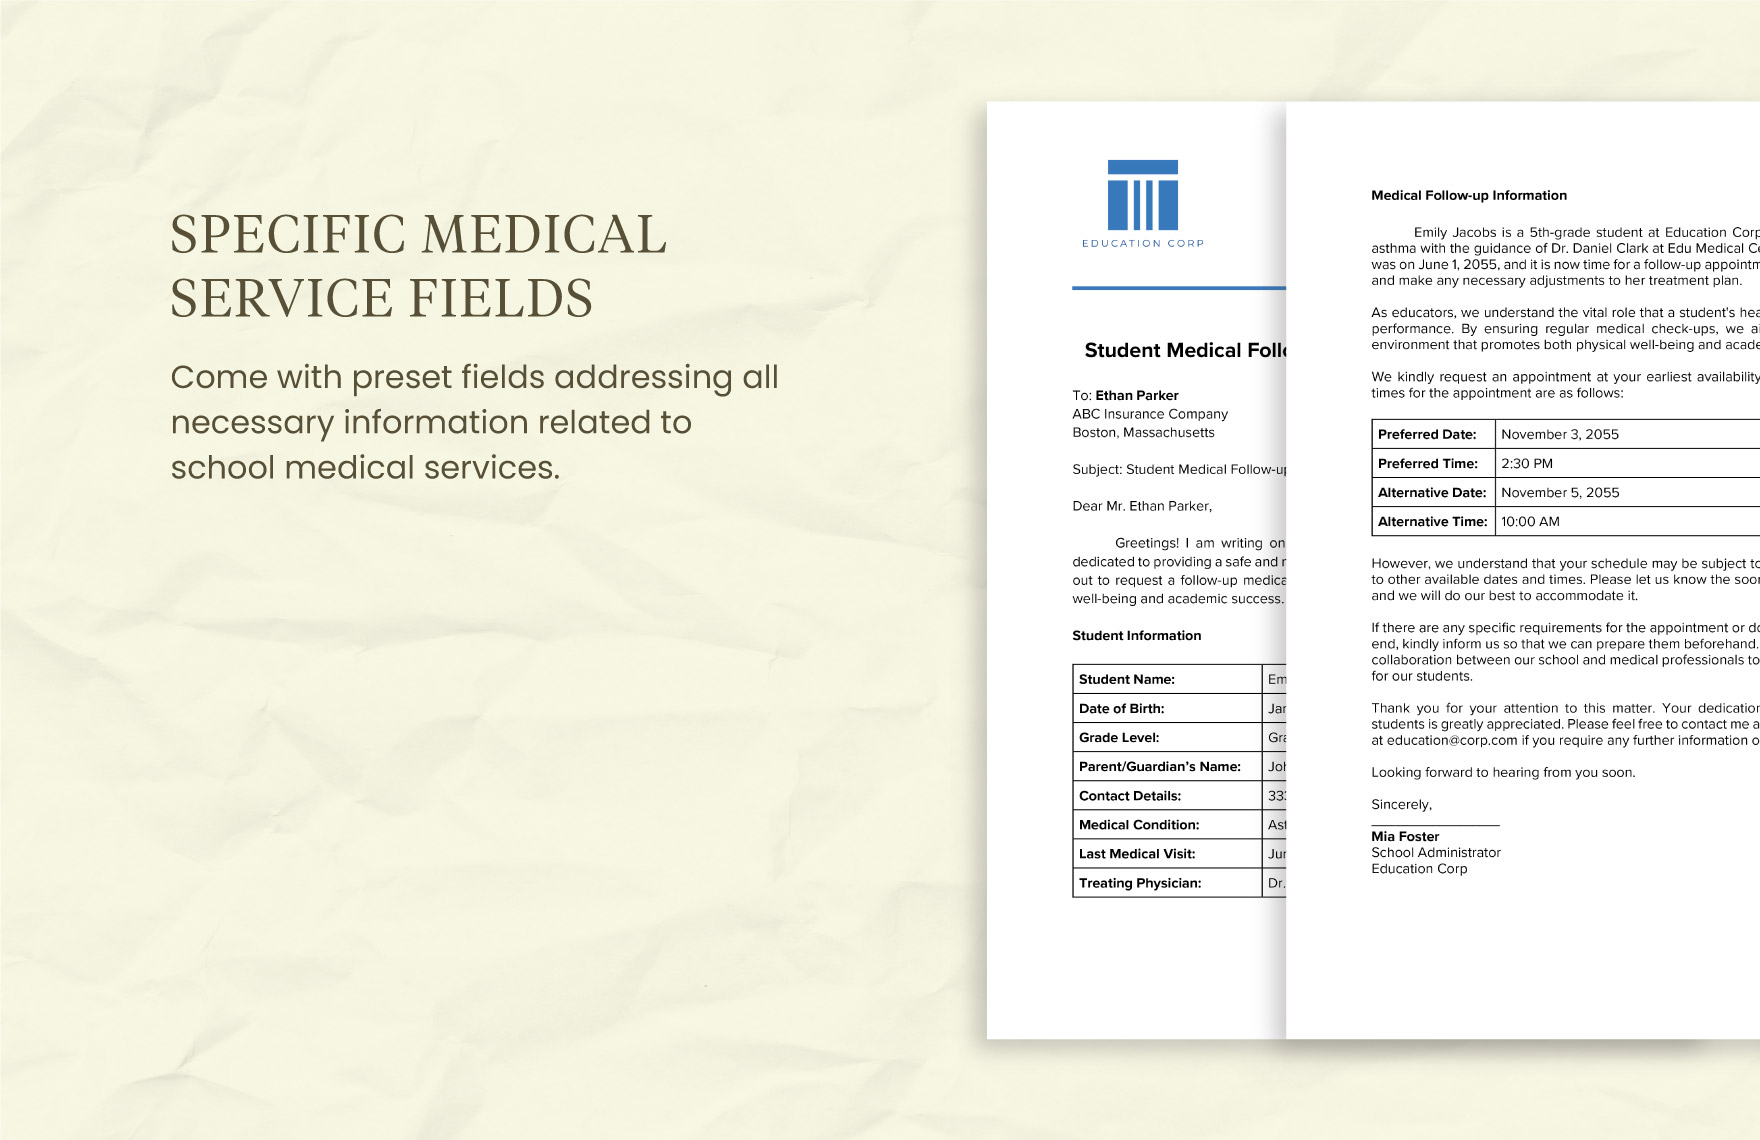 Student Medical Follow-up Appointment Request Form Template